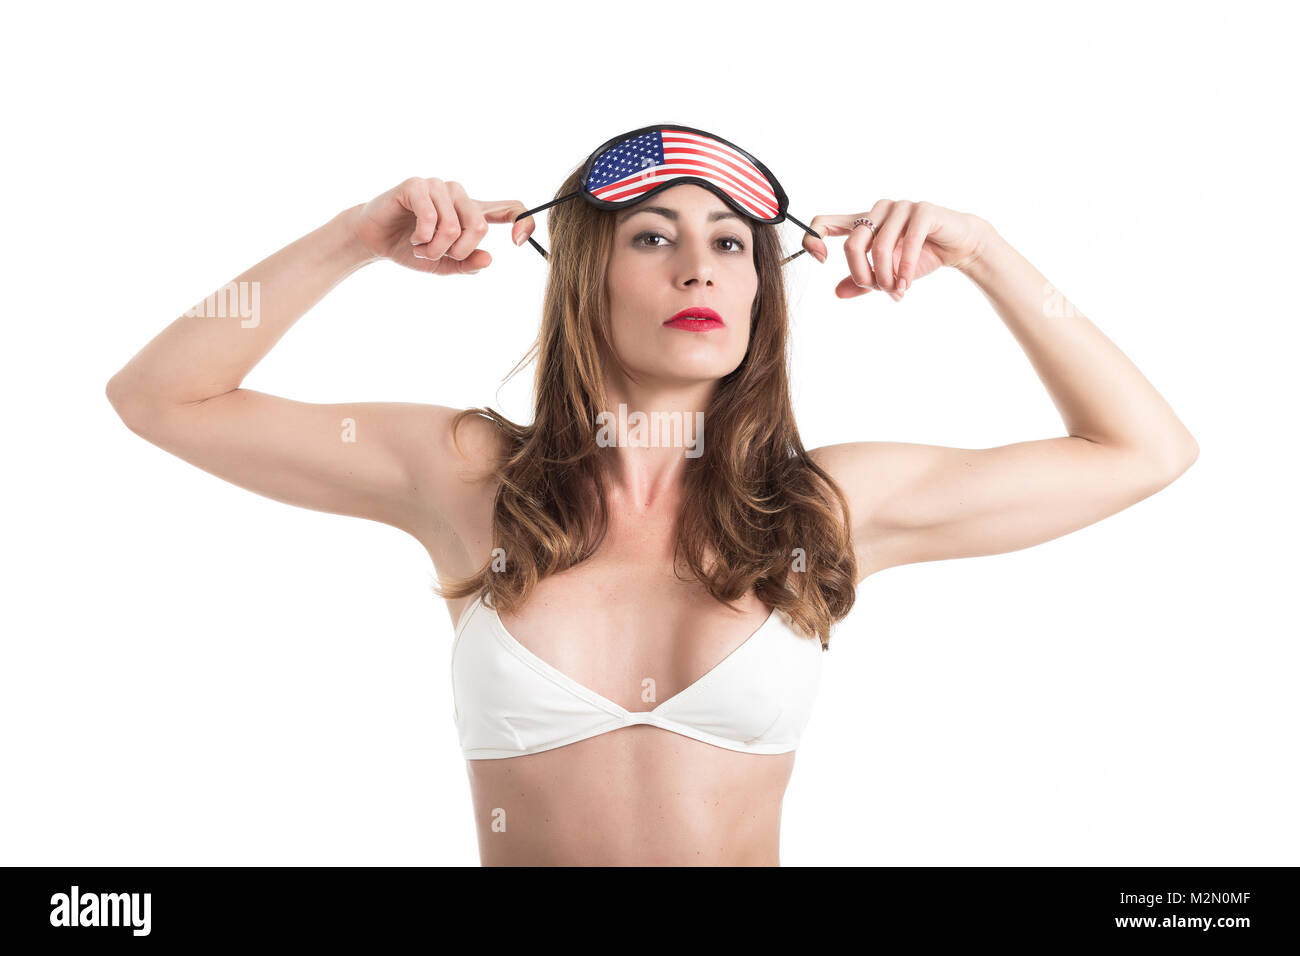 Young woman wearing eyemask. American Dream concept. Isolated on white background. Stock Photo